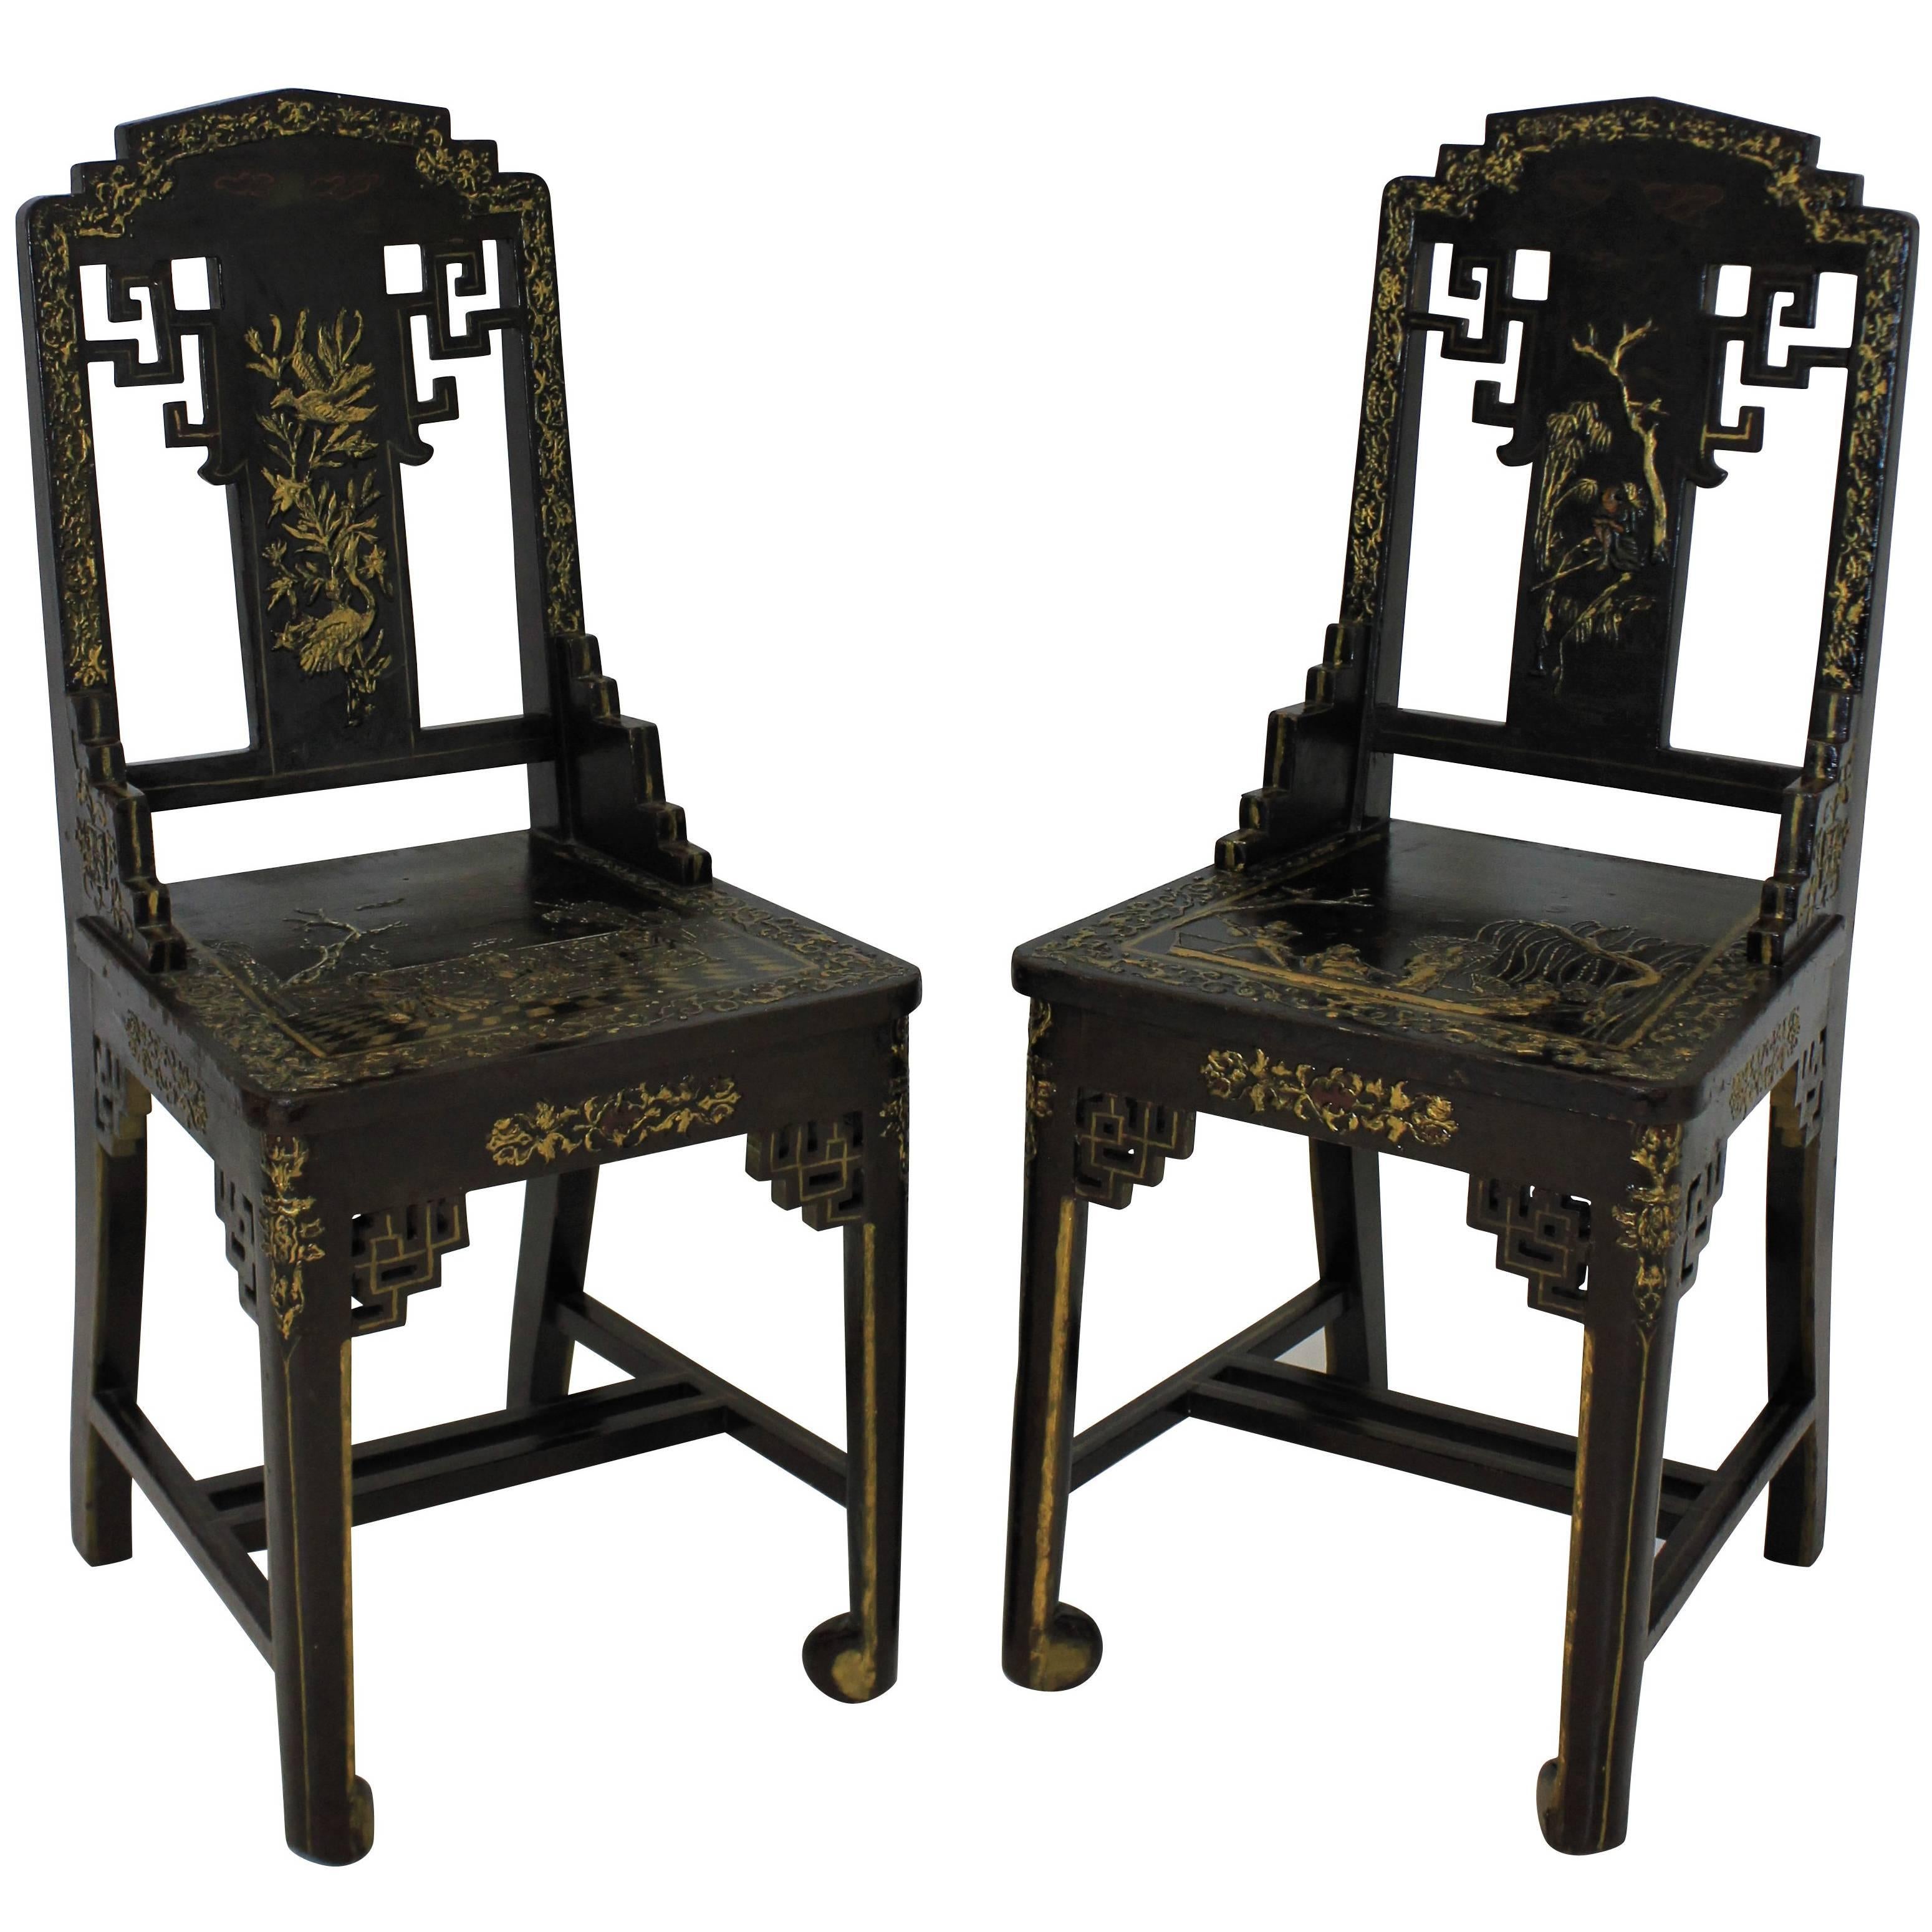 Pair of Chinese Lacquered Chairs